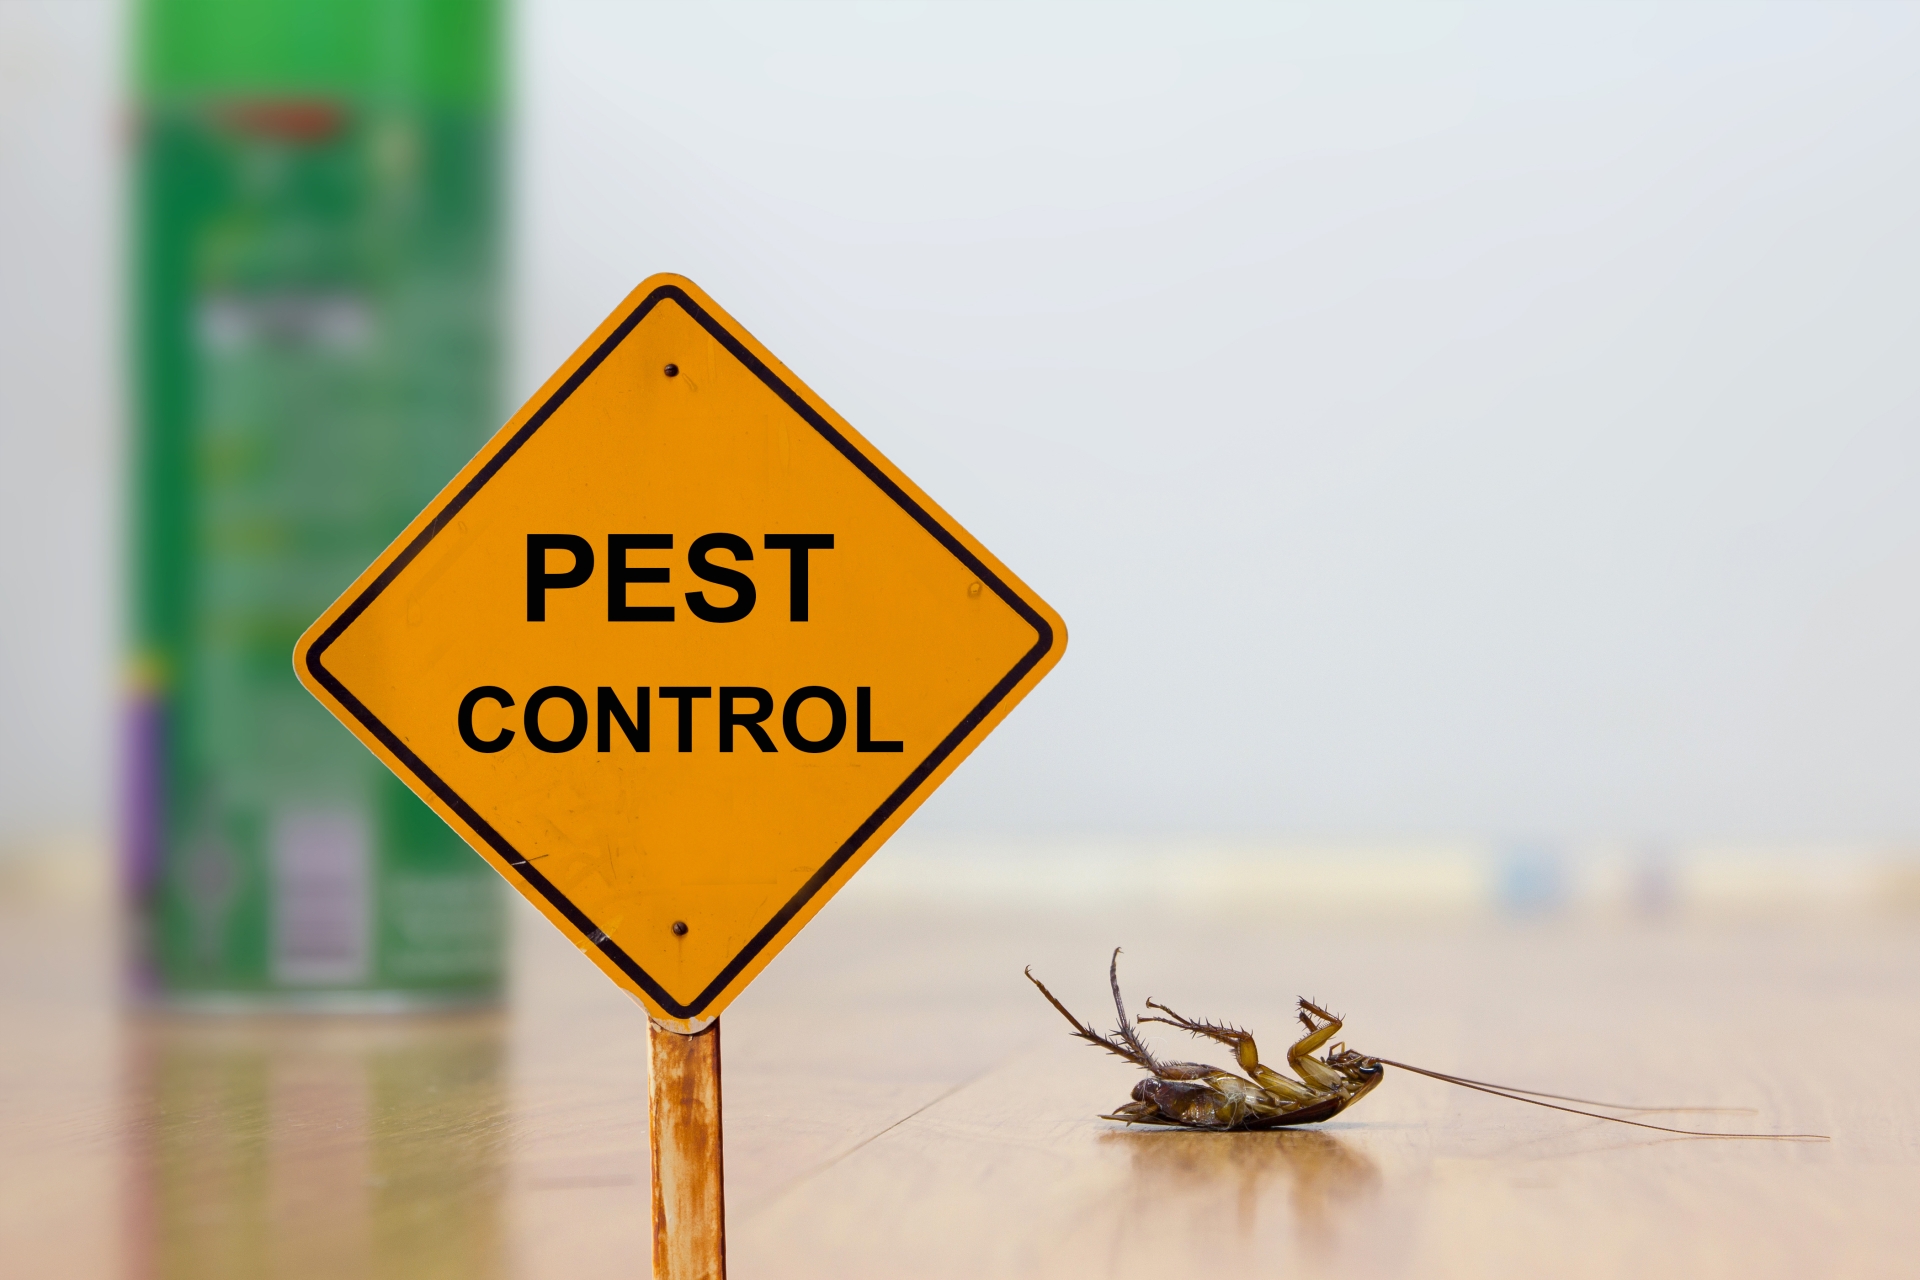 24 Hour Pest Control, Pest Control in Watford, Cassiobury, WD17. Call Now 020 8166 9746